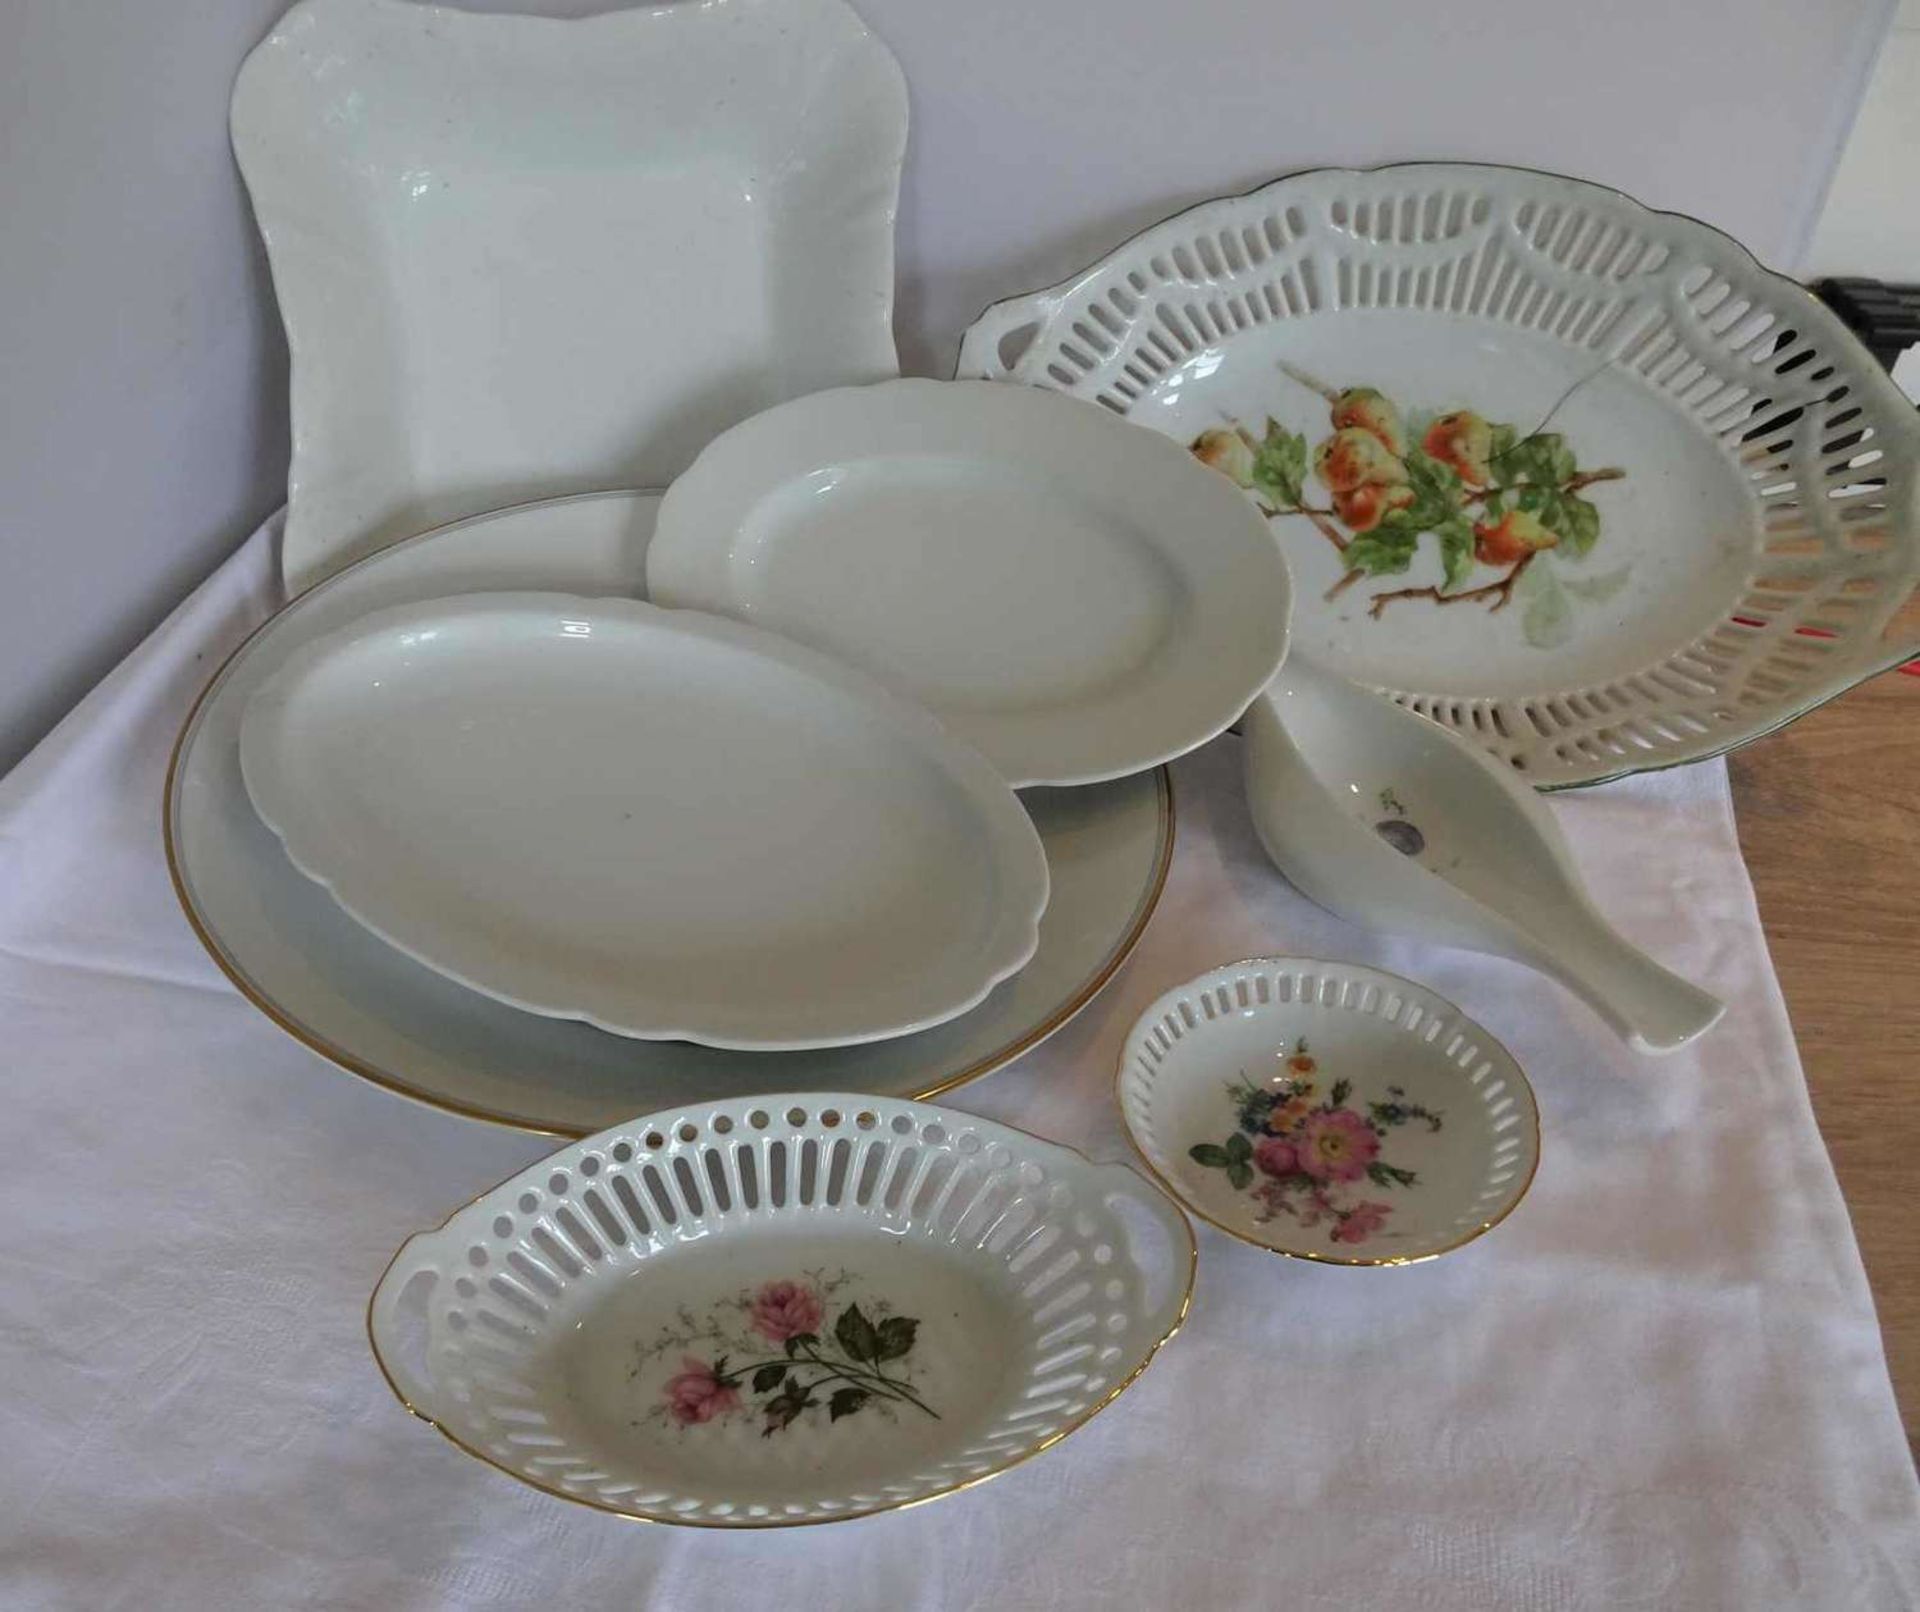 Lot of porcelain dishes from household dissolution, including Villeroy & Boch Mettlach, Rosenthal,